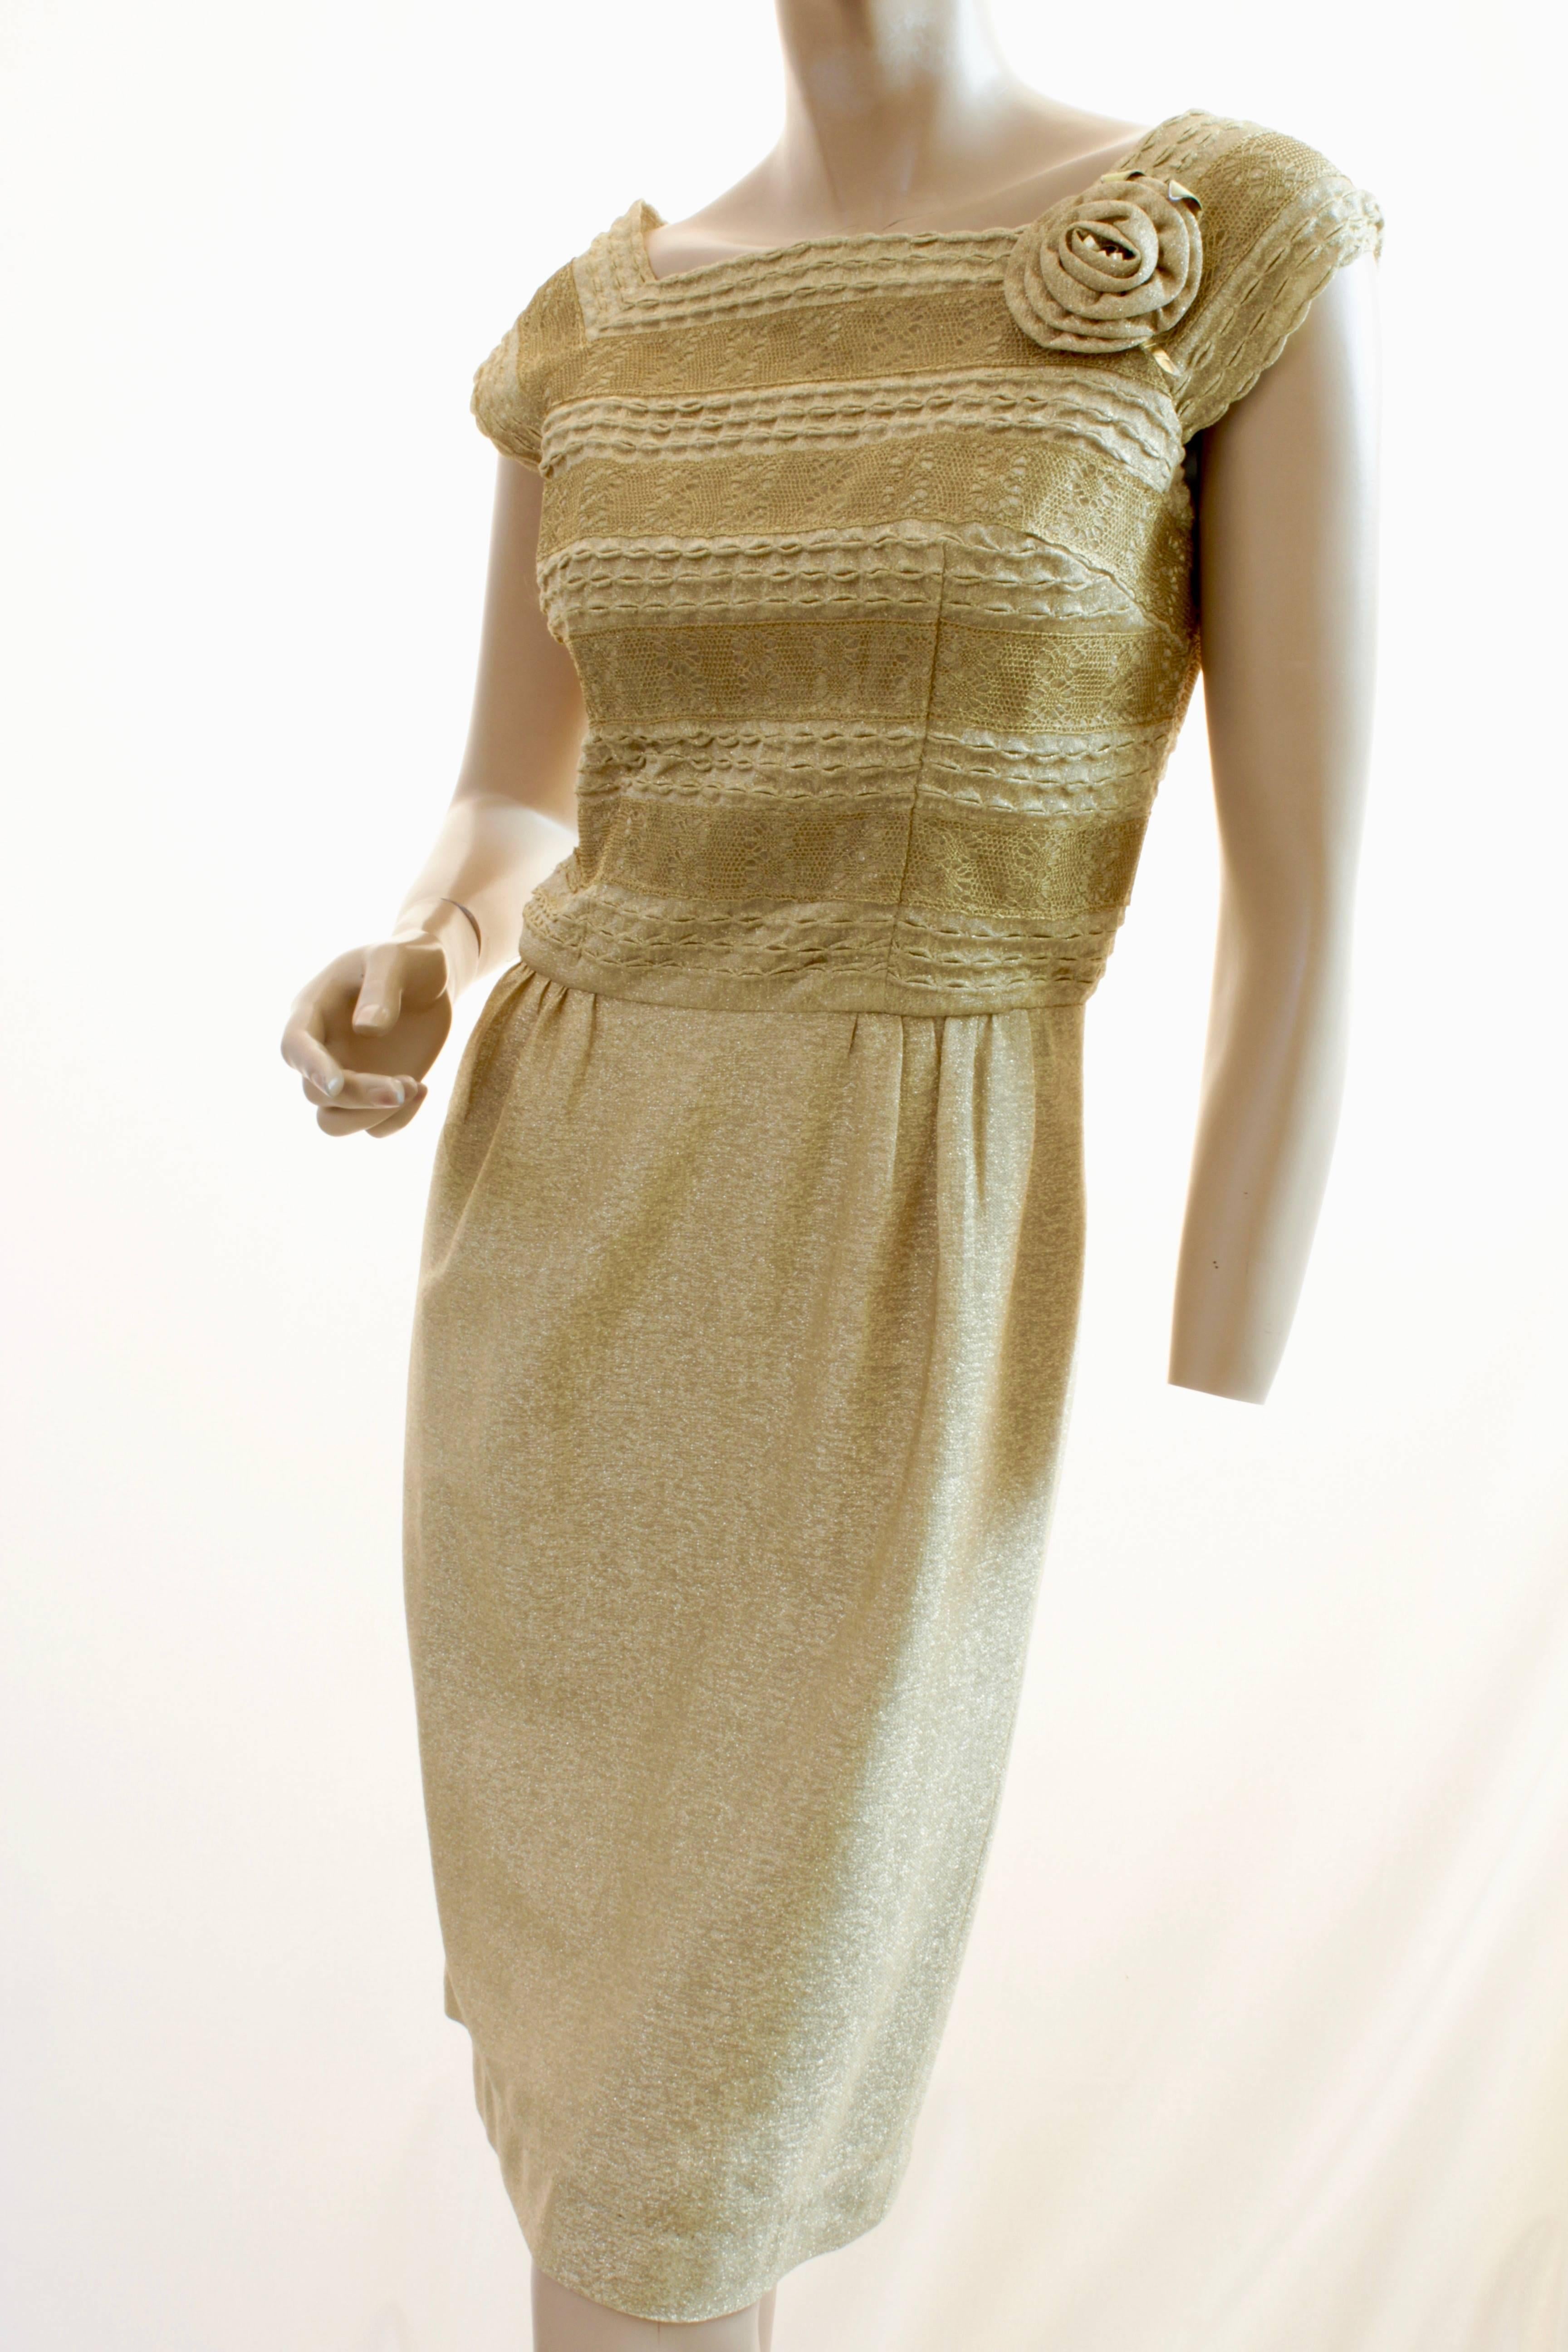 Here's a pretty cocktail dress from Carlye for I.Magnin.  Made from a gold lurex fabric, it features a gold macrame overlay at the bodice with a large rosette at the wearer's left shoulder.  Fastens in back with a metal zipper.  In very good